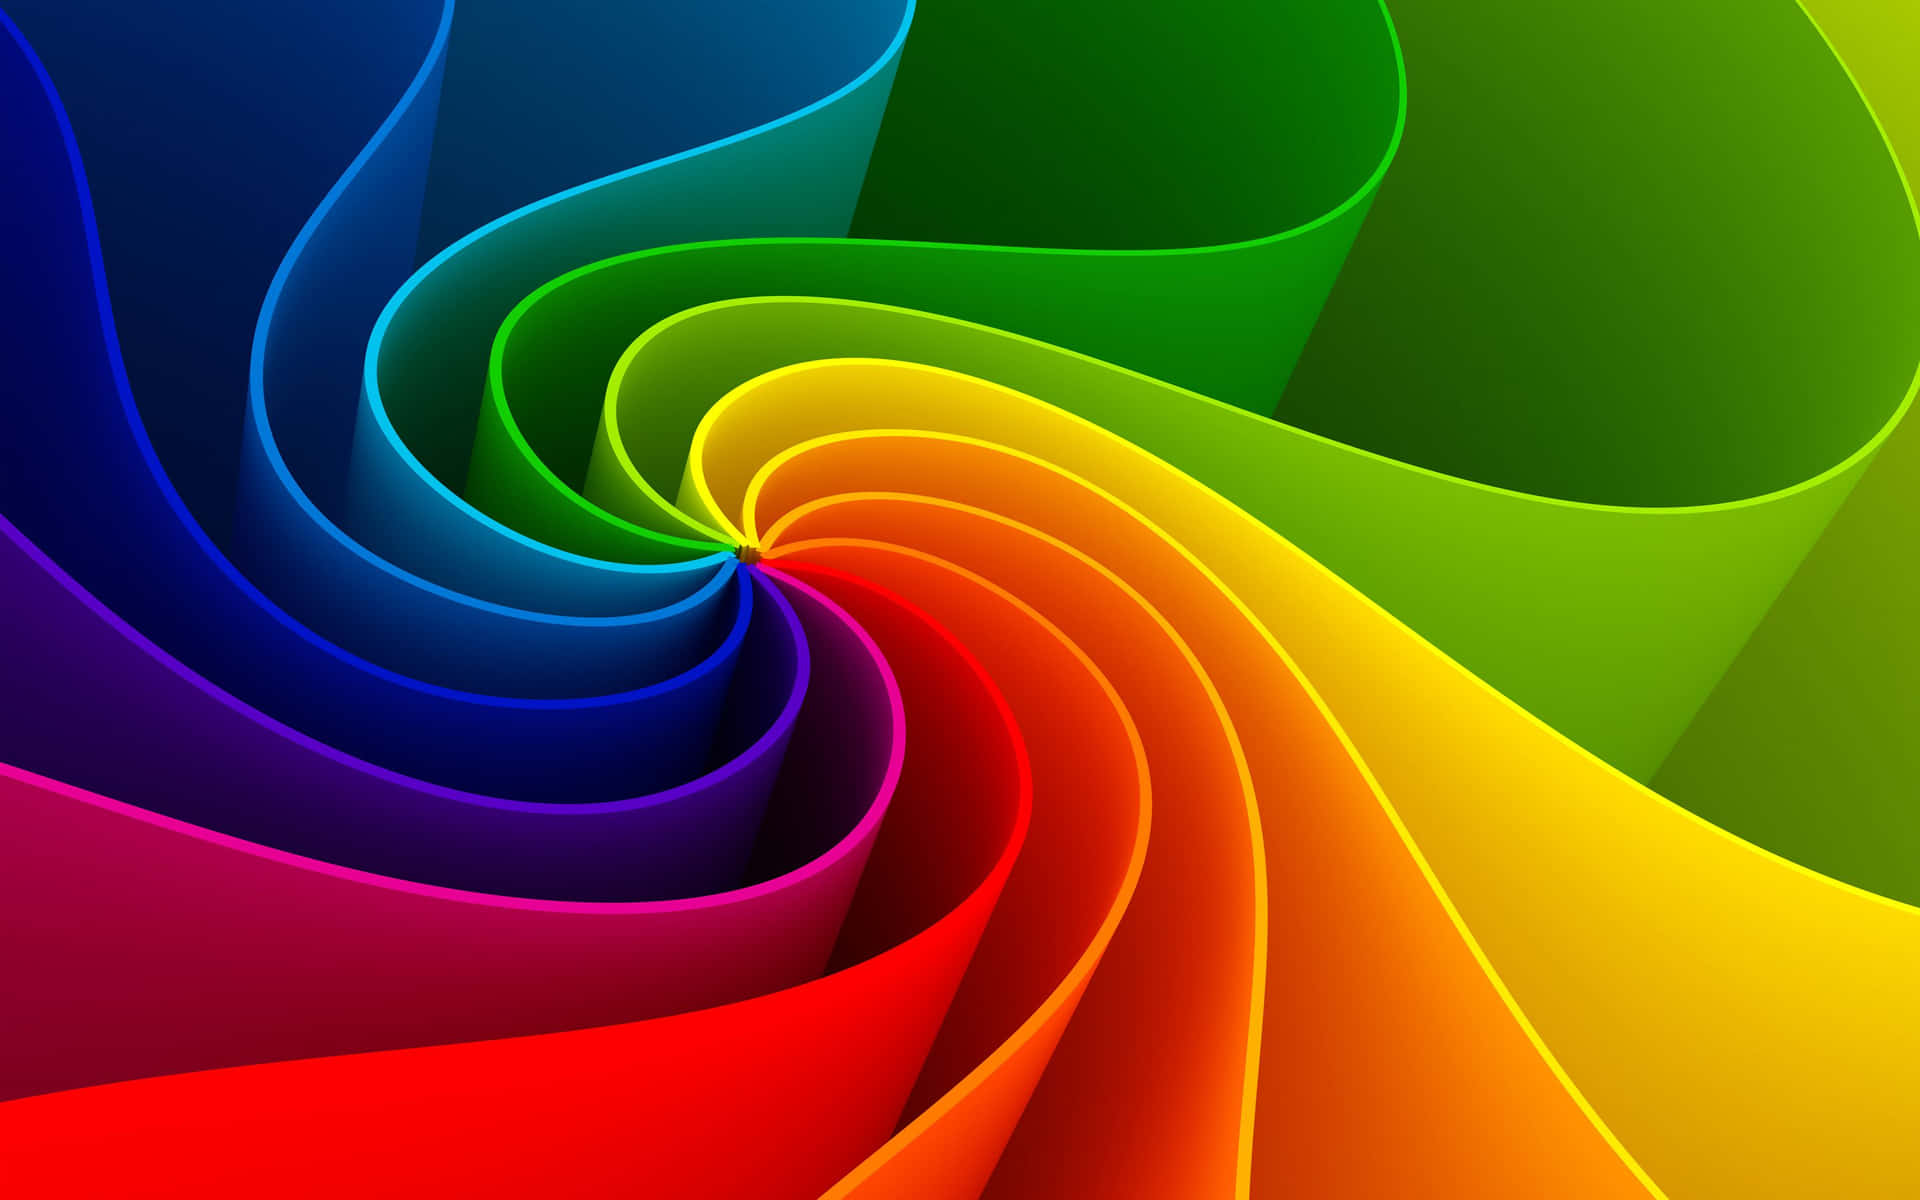 Brighten Up Your Desktop with a Colorful Background Wallpaper